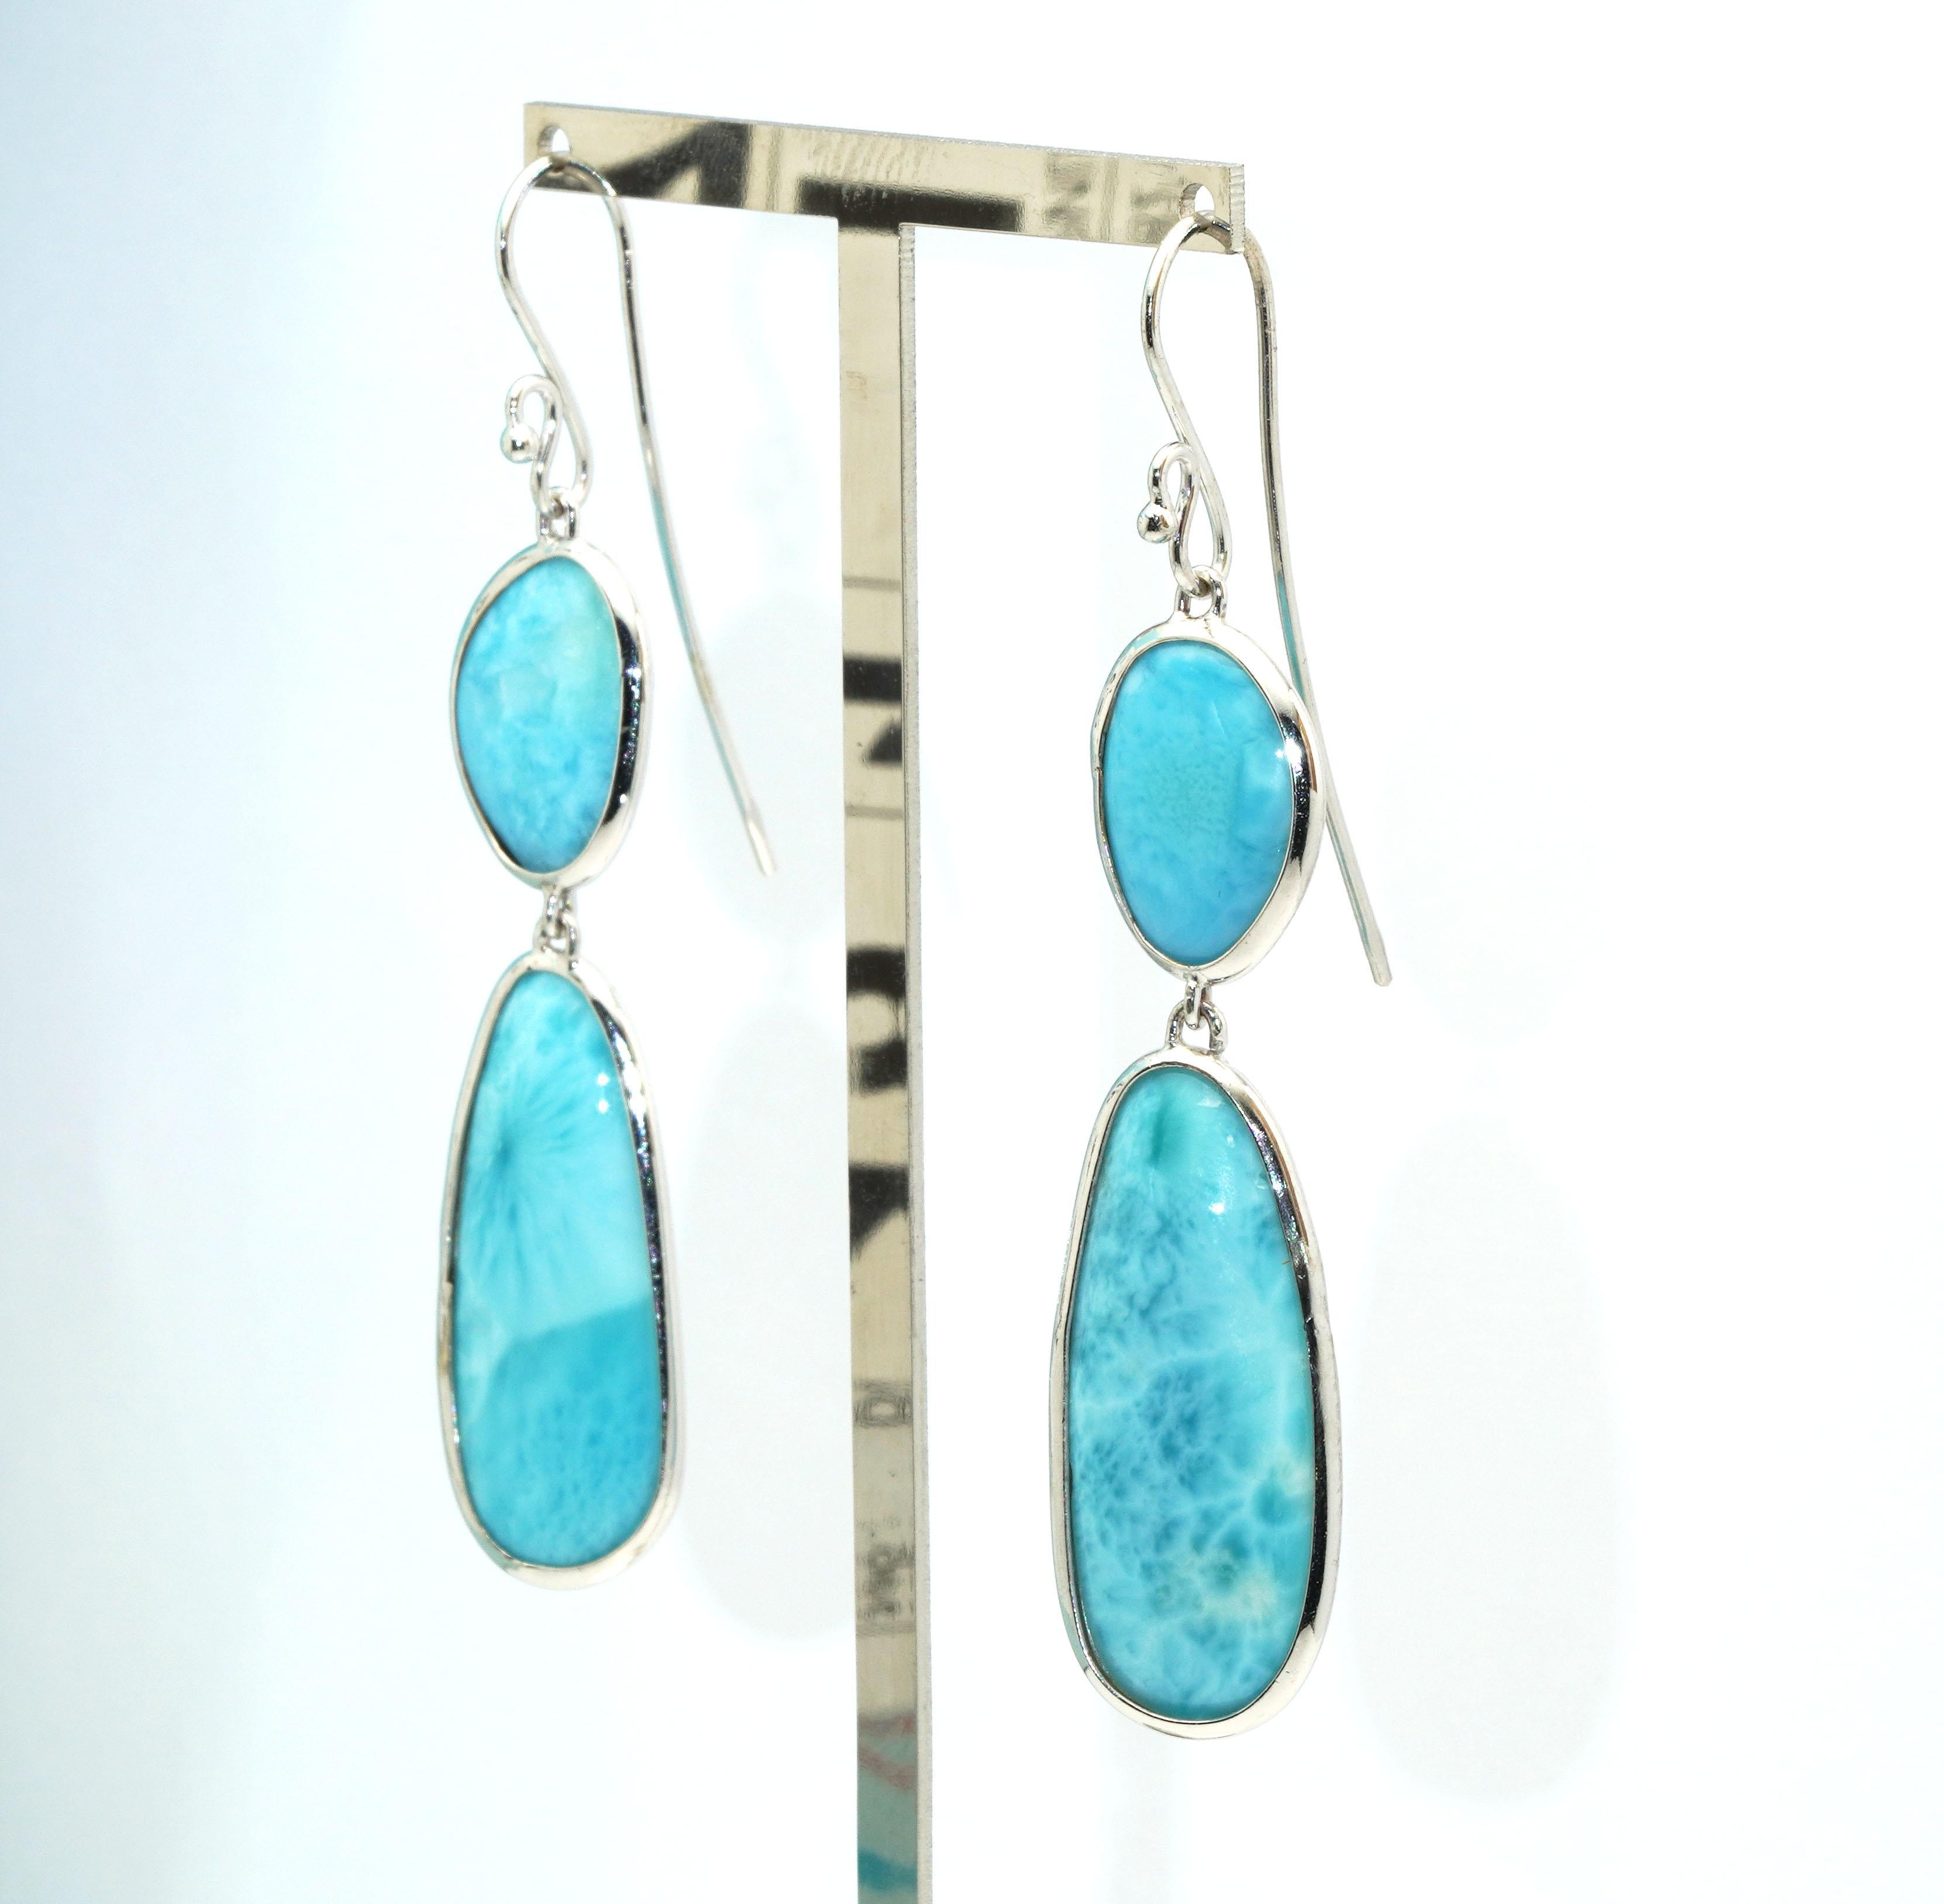 14 kt White gold pair of earrings with Larimar.
Gold Color: White
Dimensions: 65mm. width
Total weight: 9.44 grams

Set with:
- Larimar
Cut: Cabochon